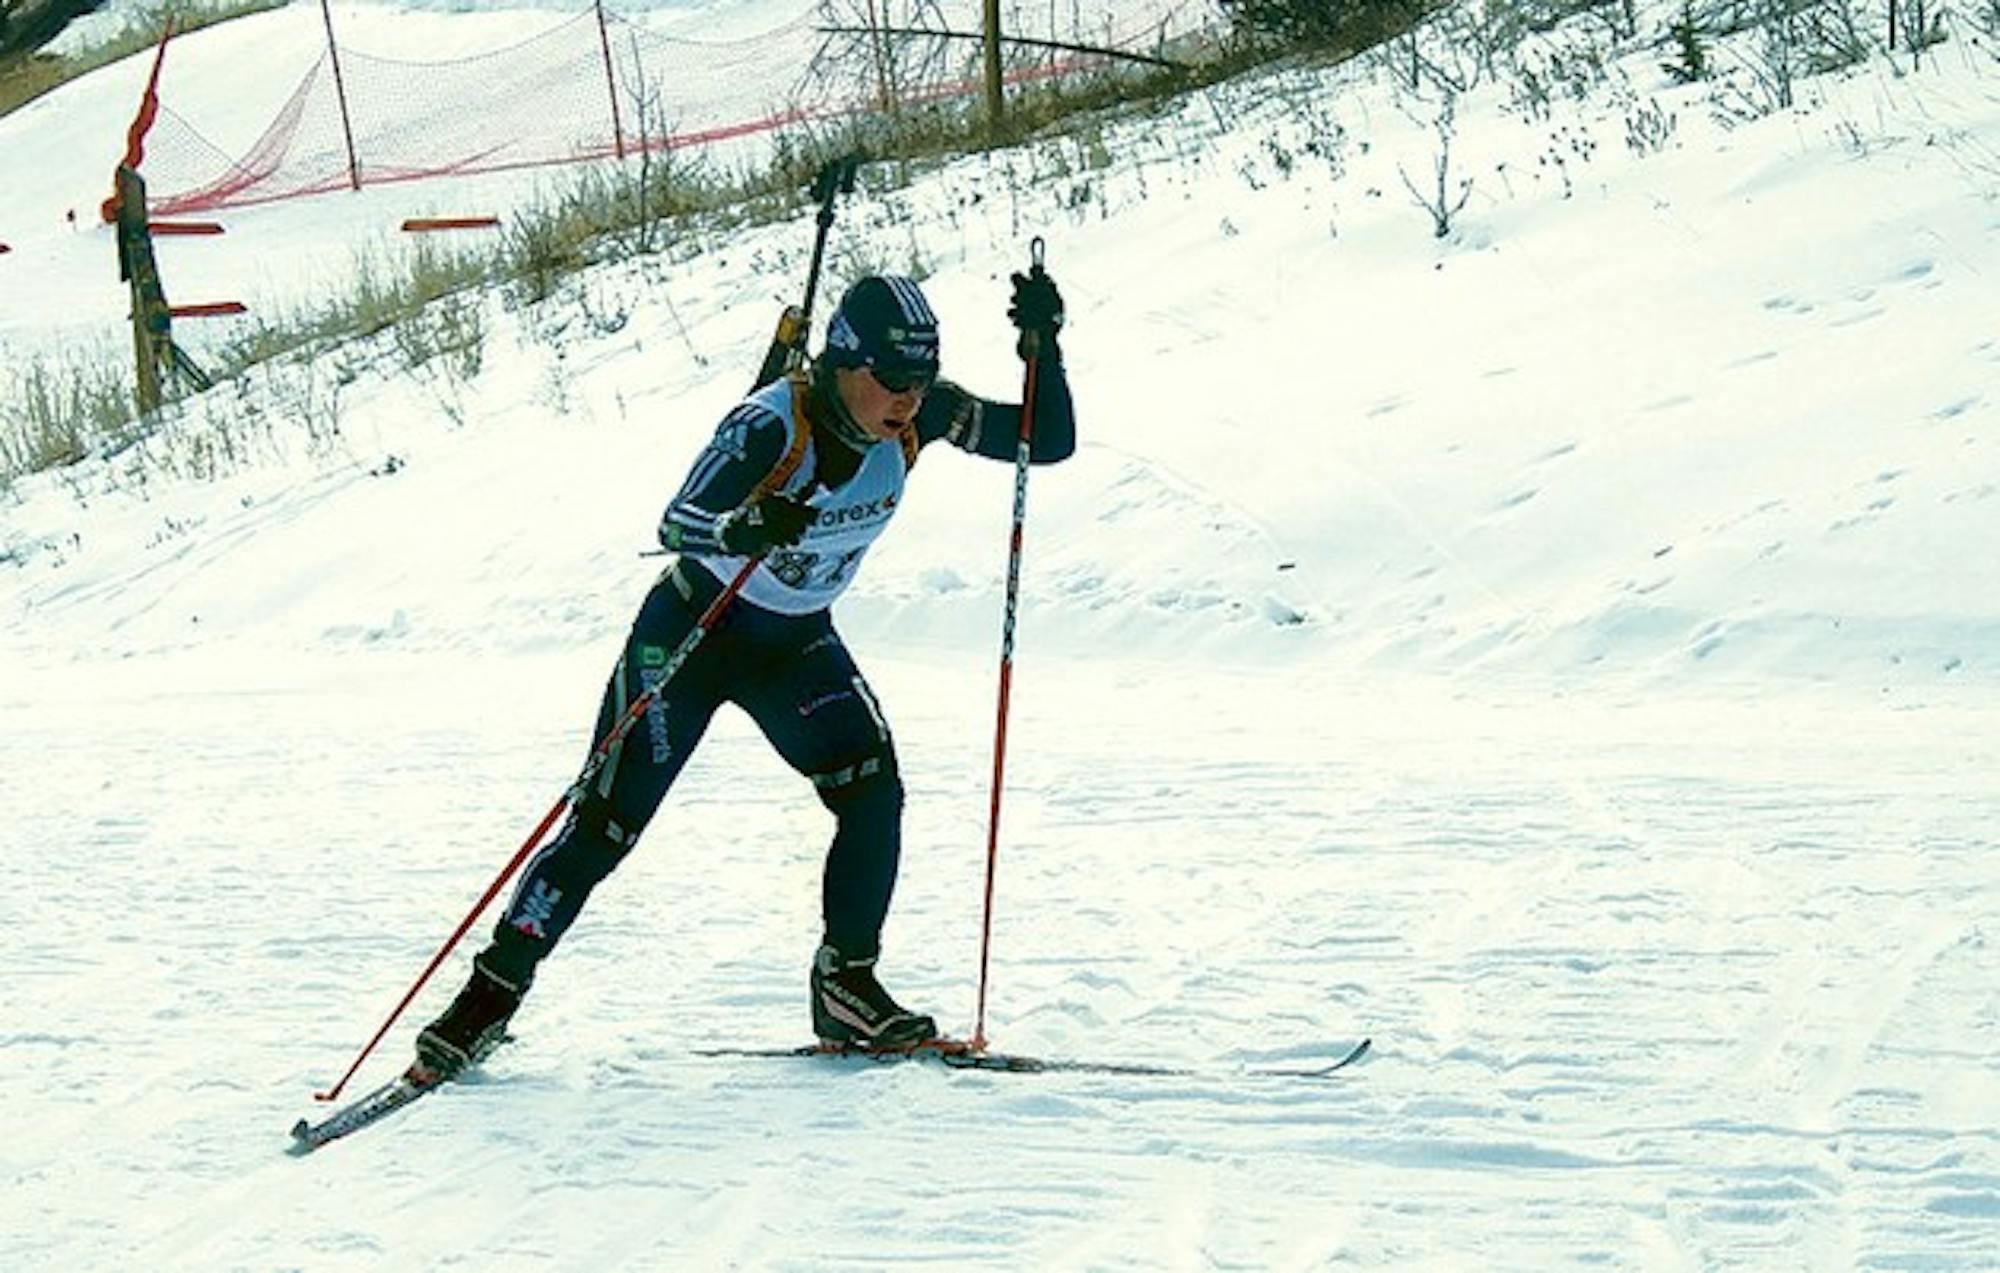 Laura Spector '10, a former cross country skier for Dartmouth, will begin Olympic competition as early as Feb. 13.